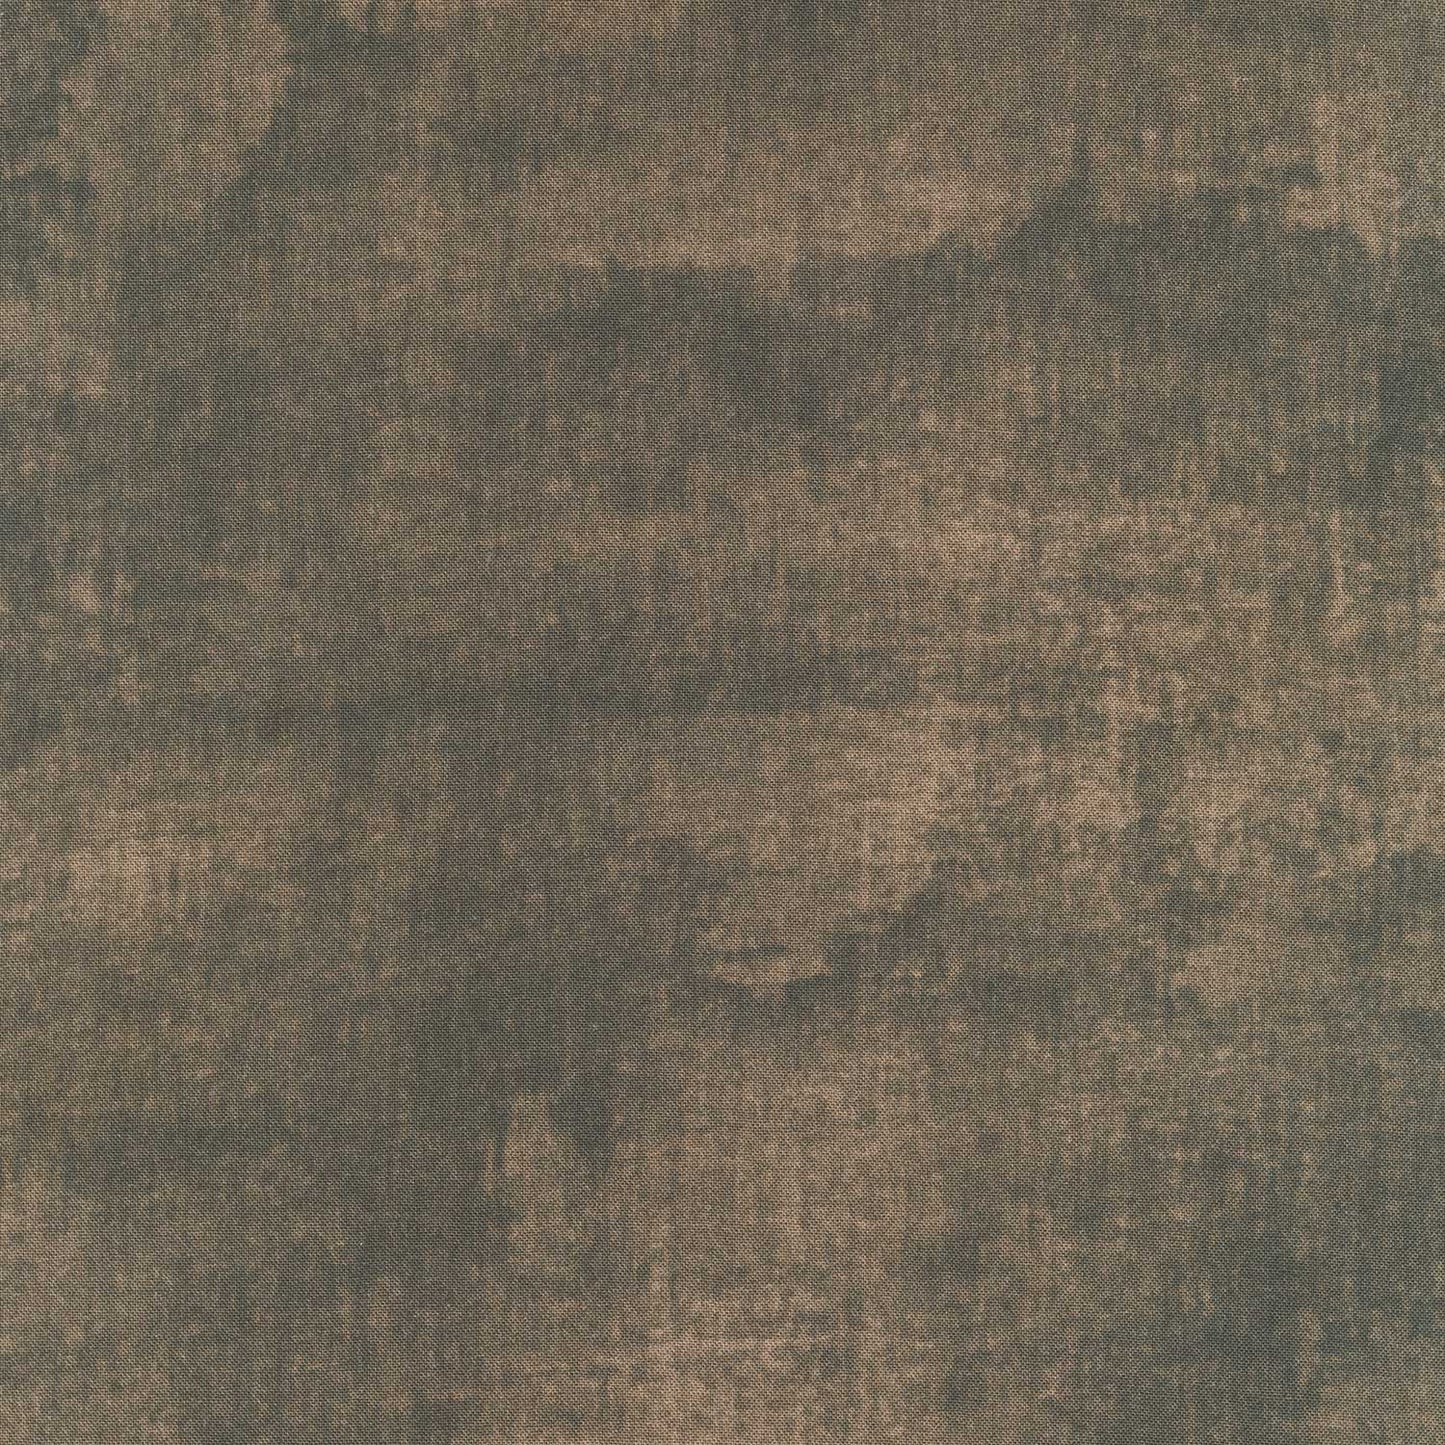 Wilmington Essentials - Dry Brush - Brown 108" Wide Backing Yardage Primary Image